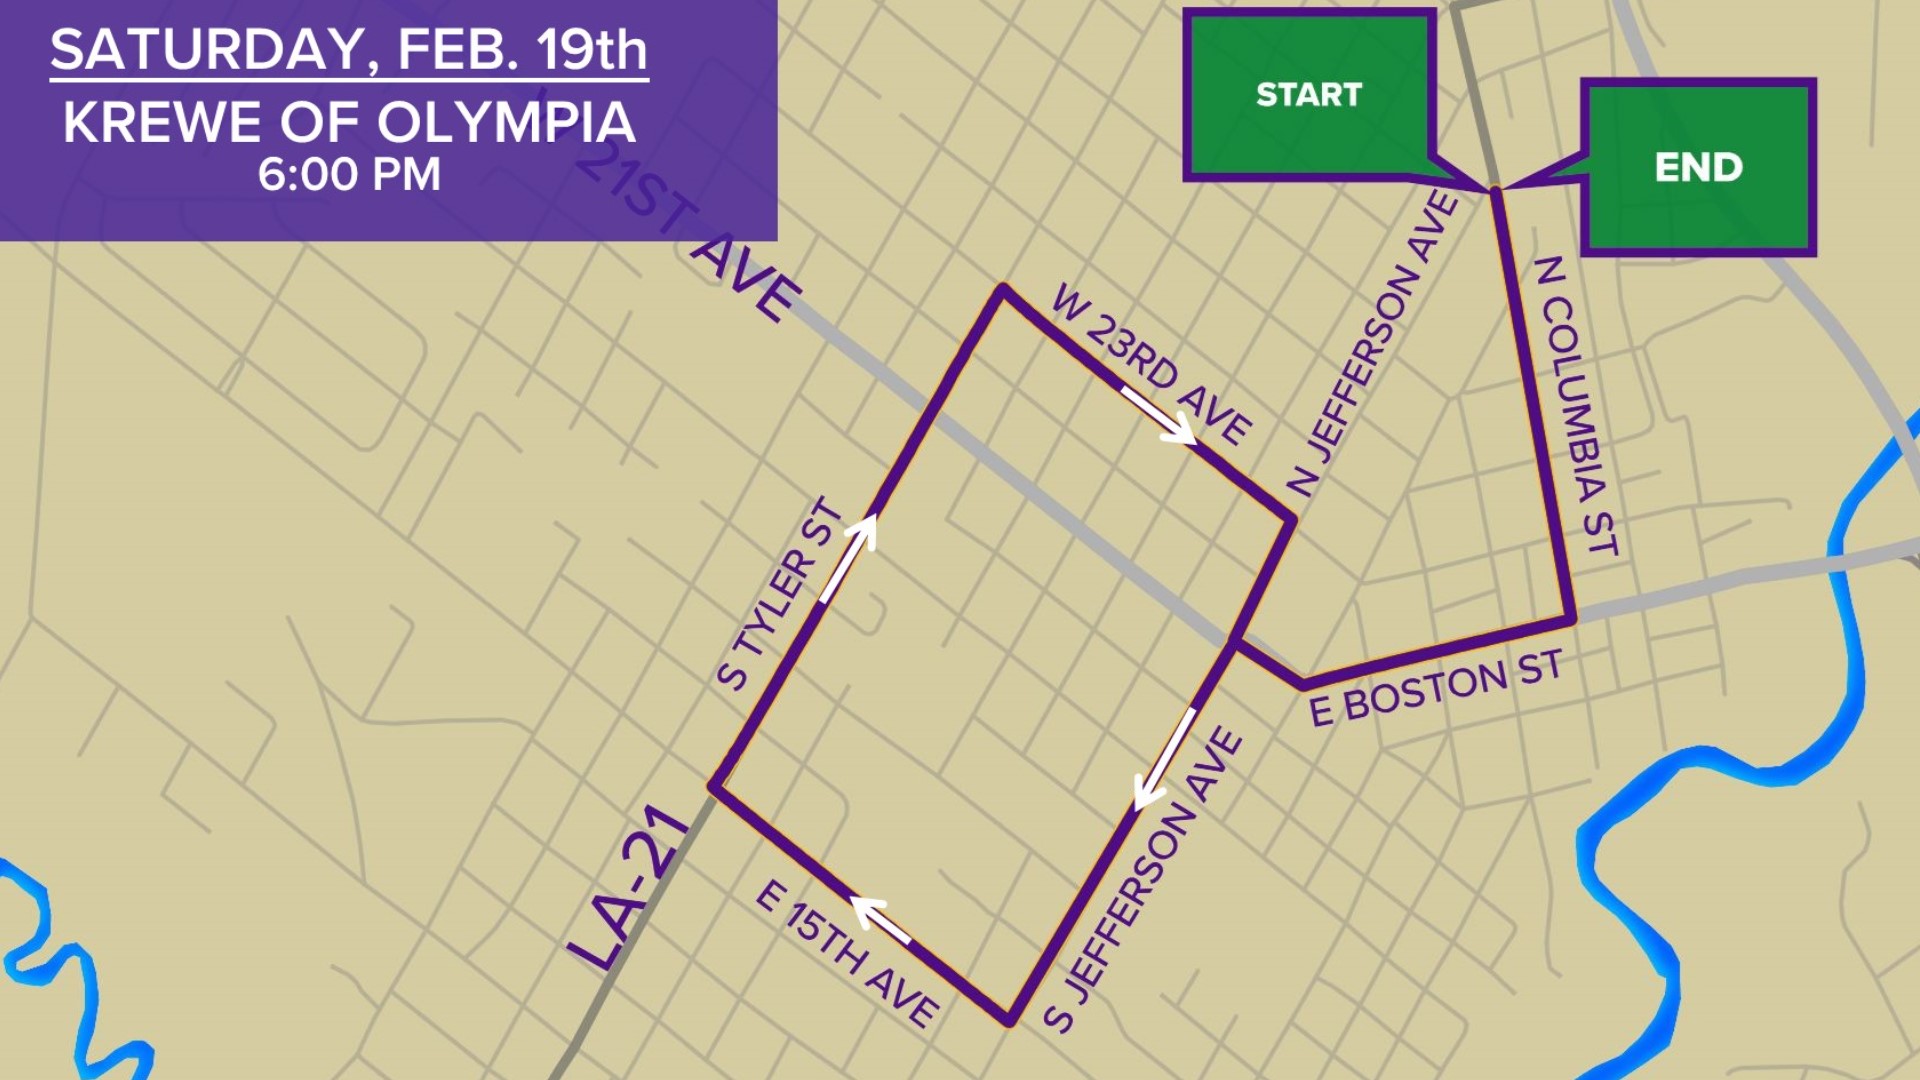 Krewe of Olympia parade route, start time